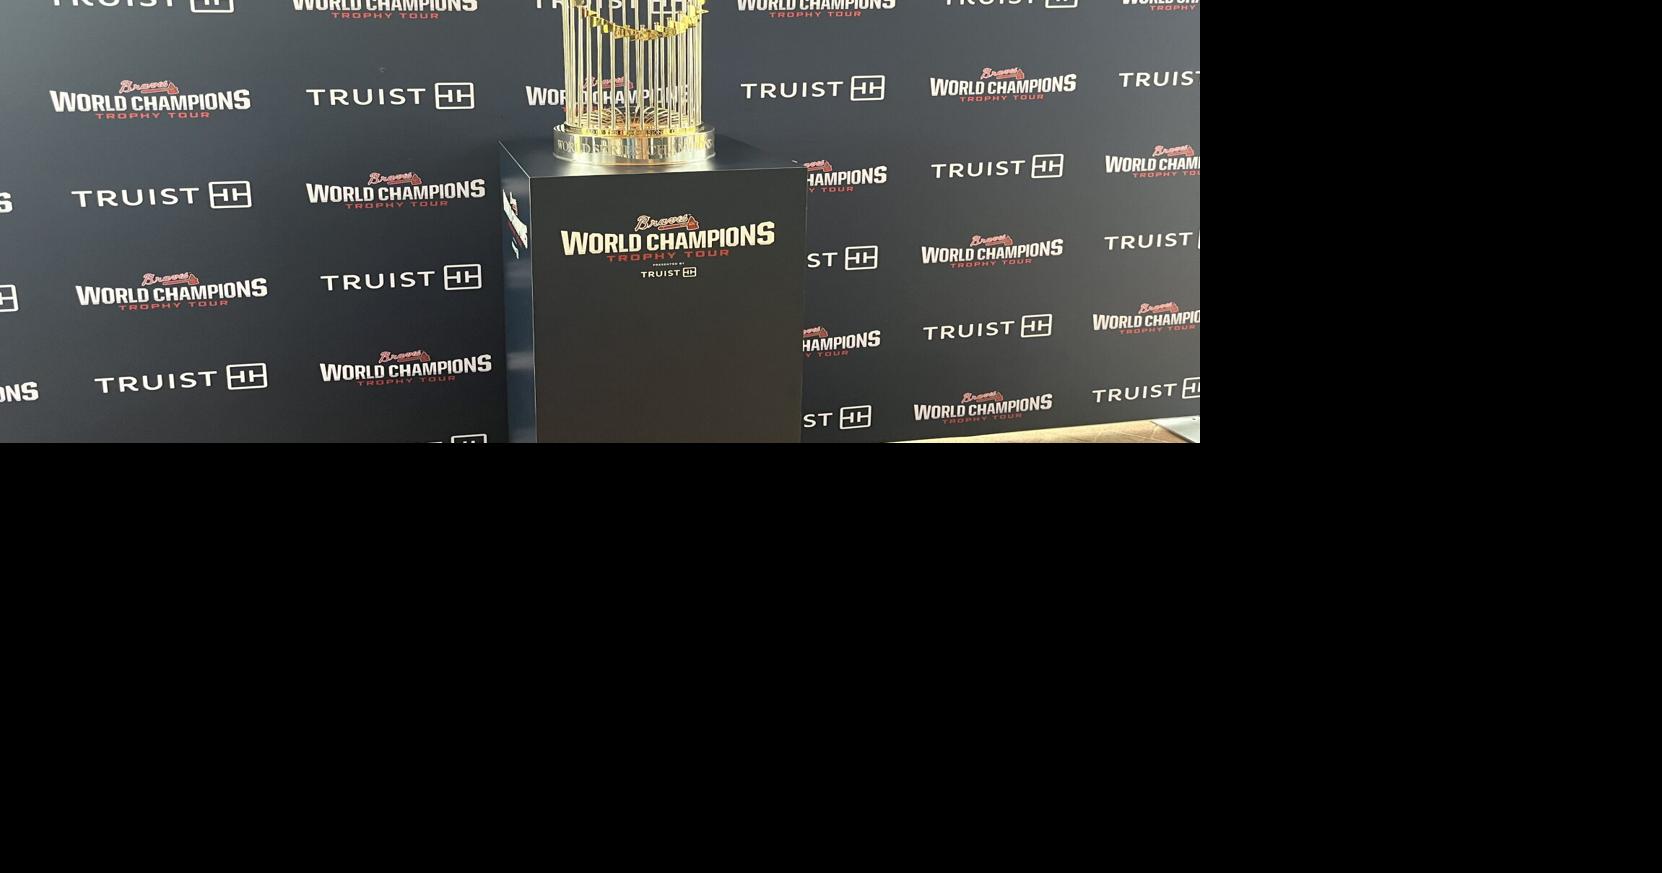 Braves Champions Trophy Tour makes stop in Southaven